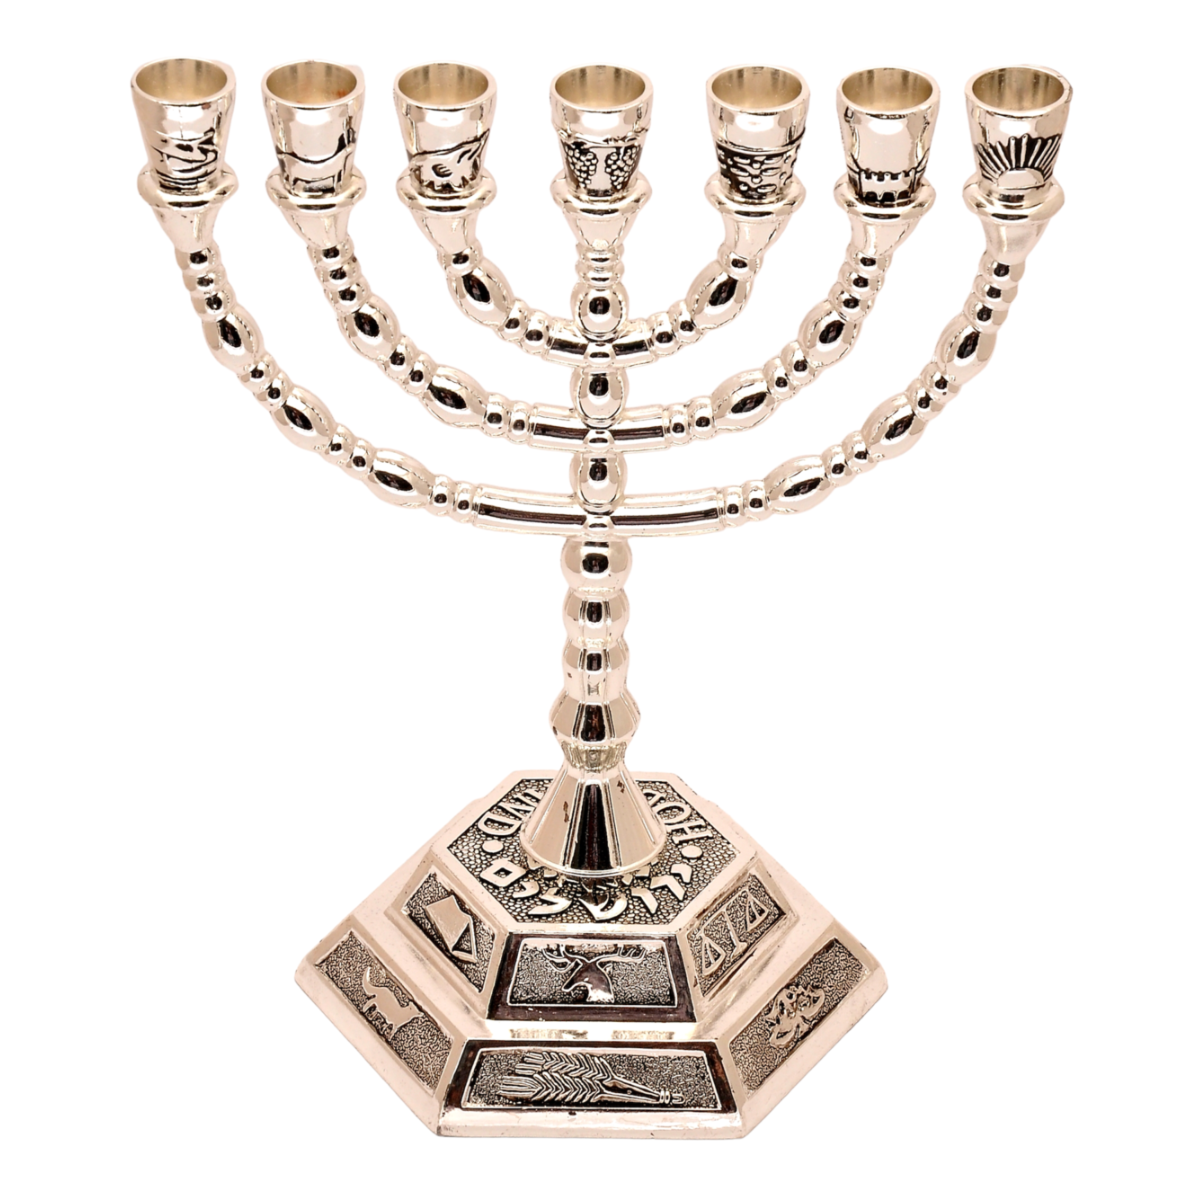 Menorah Silver Plated Candle Holder from Jerusalem 7.5″ / 19cm